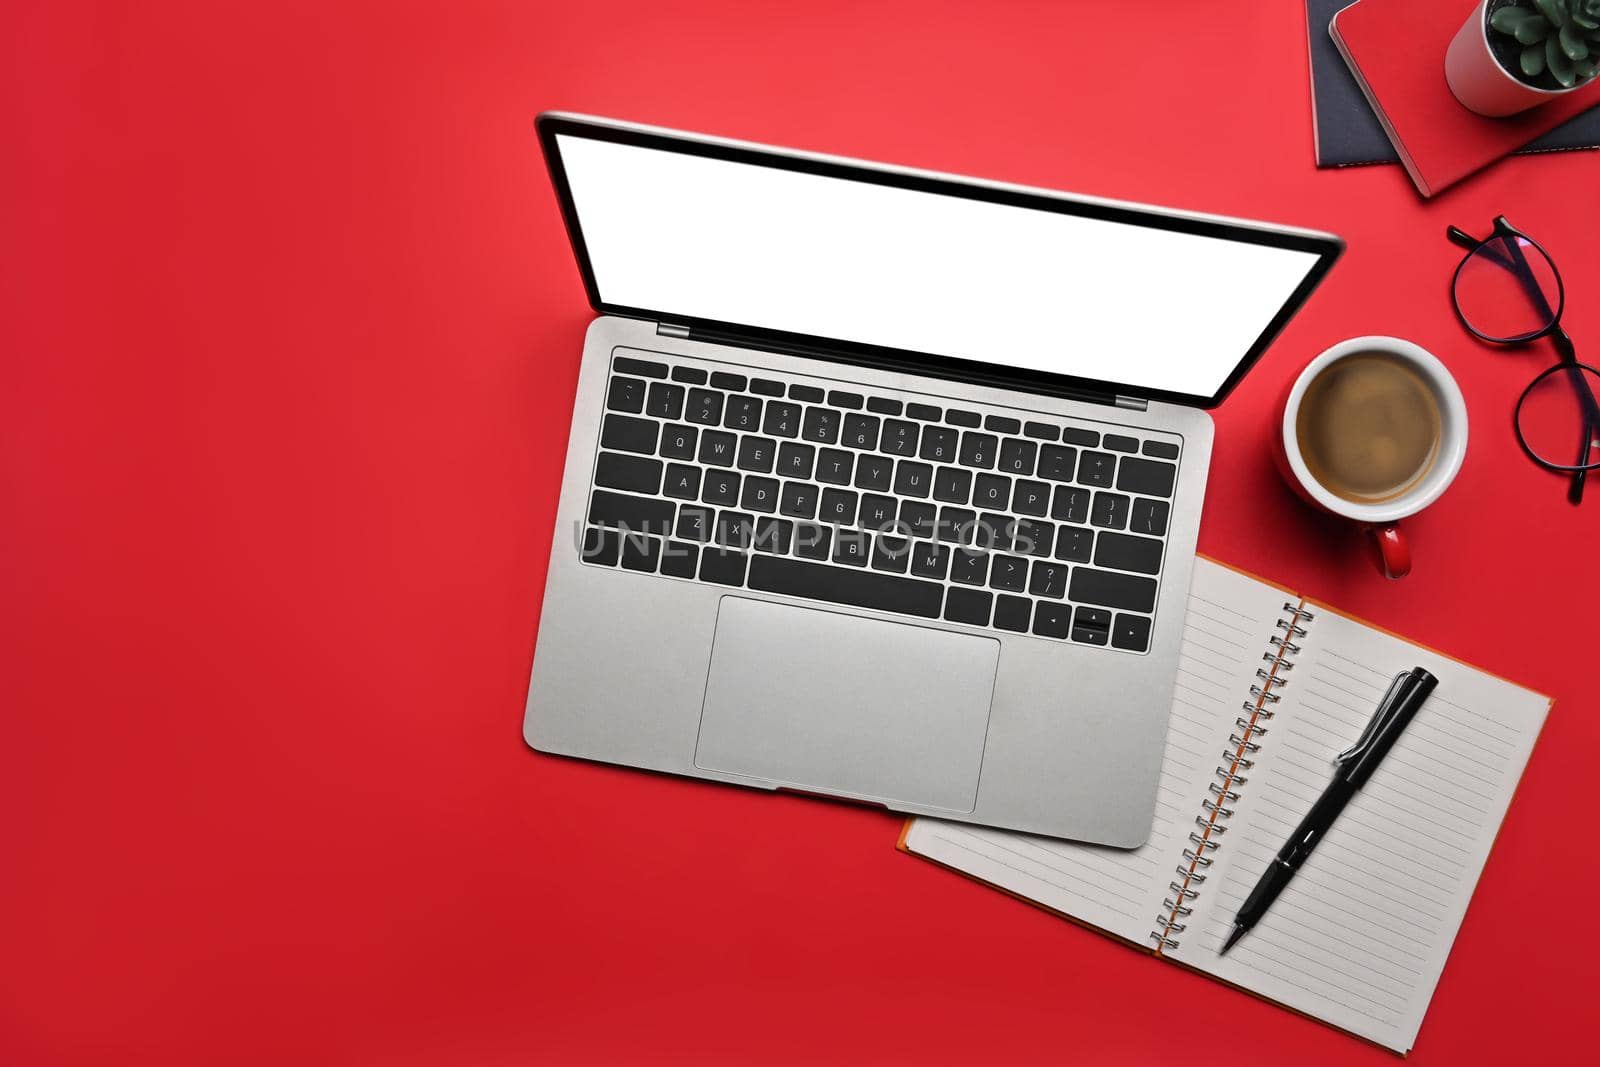 Computer laptop with white screen, notebook and coffee cup on red background.